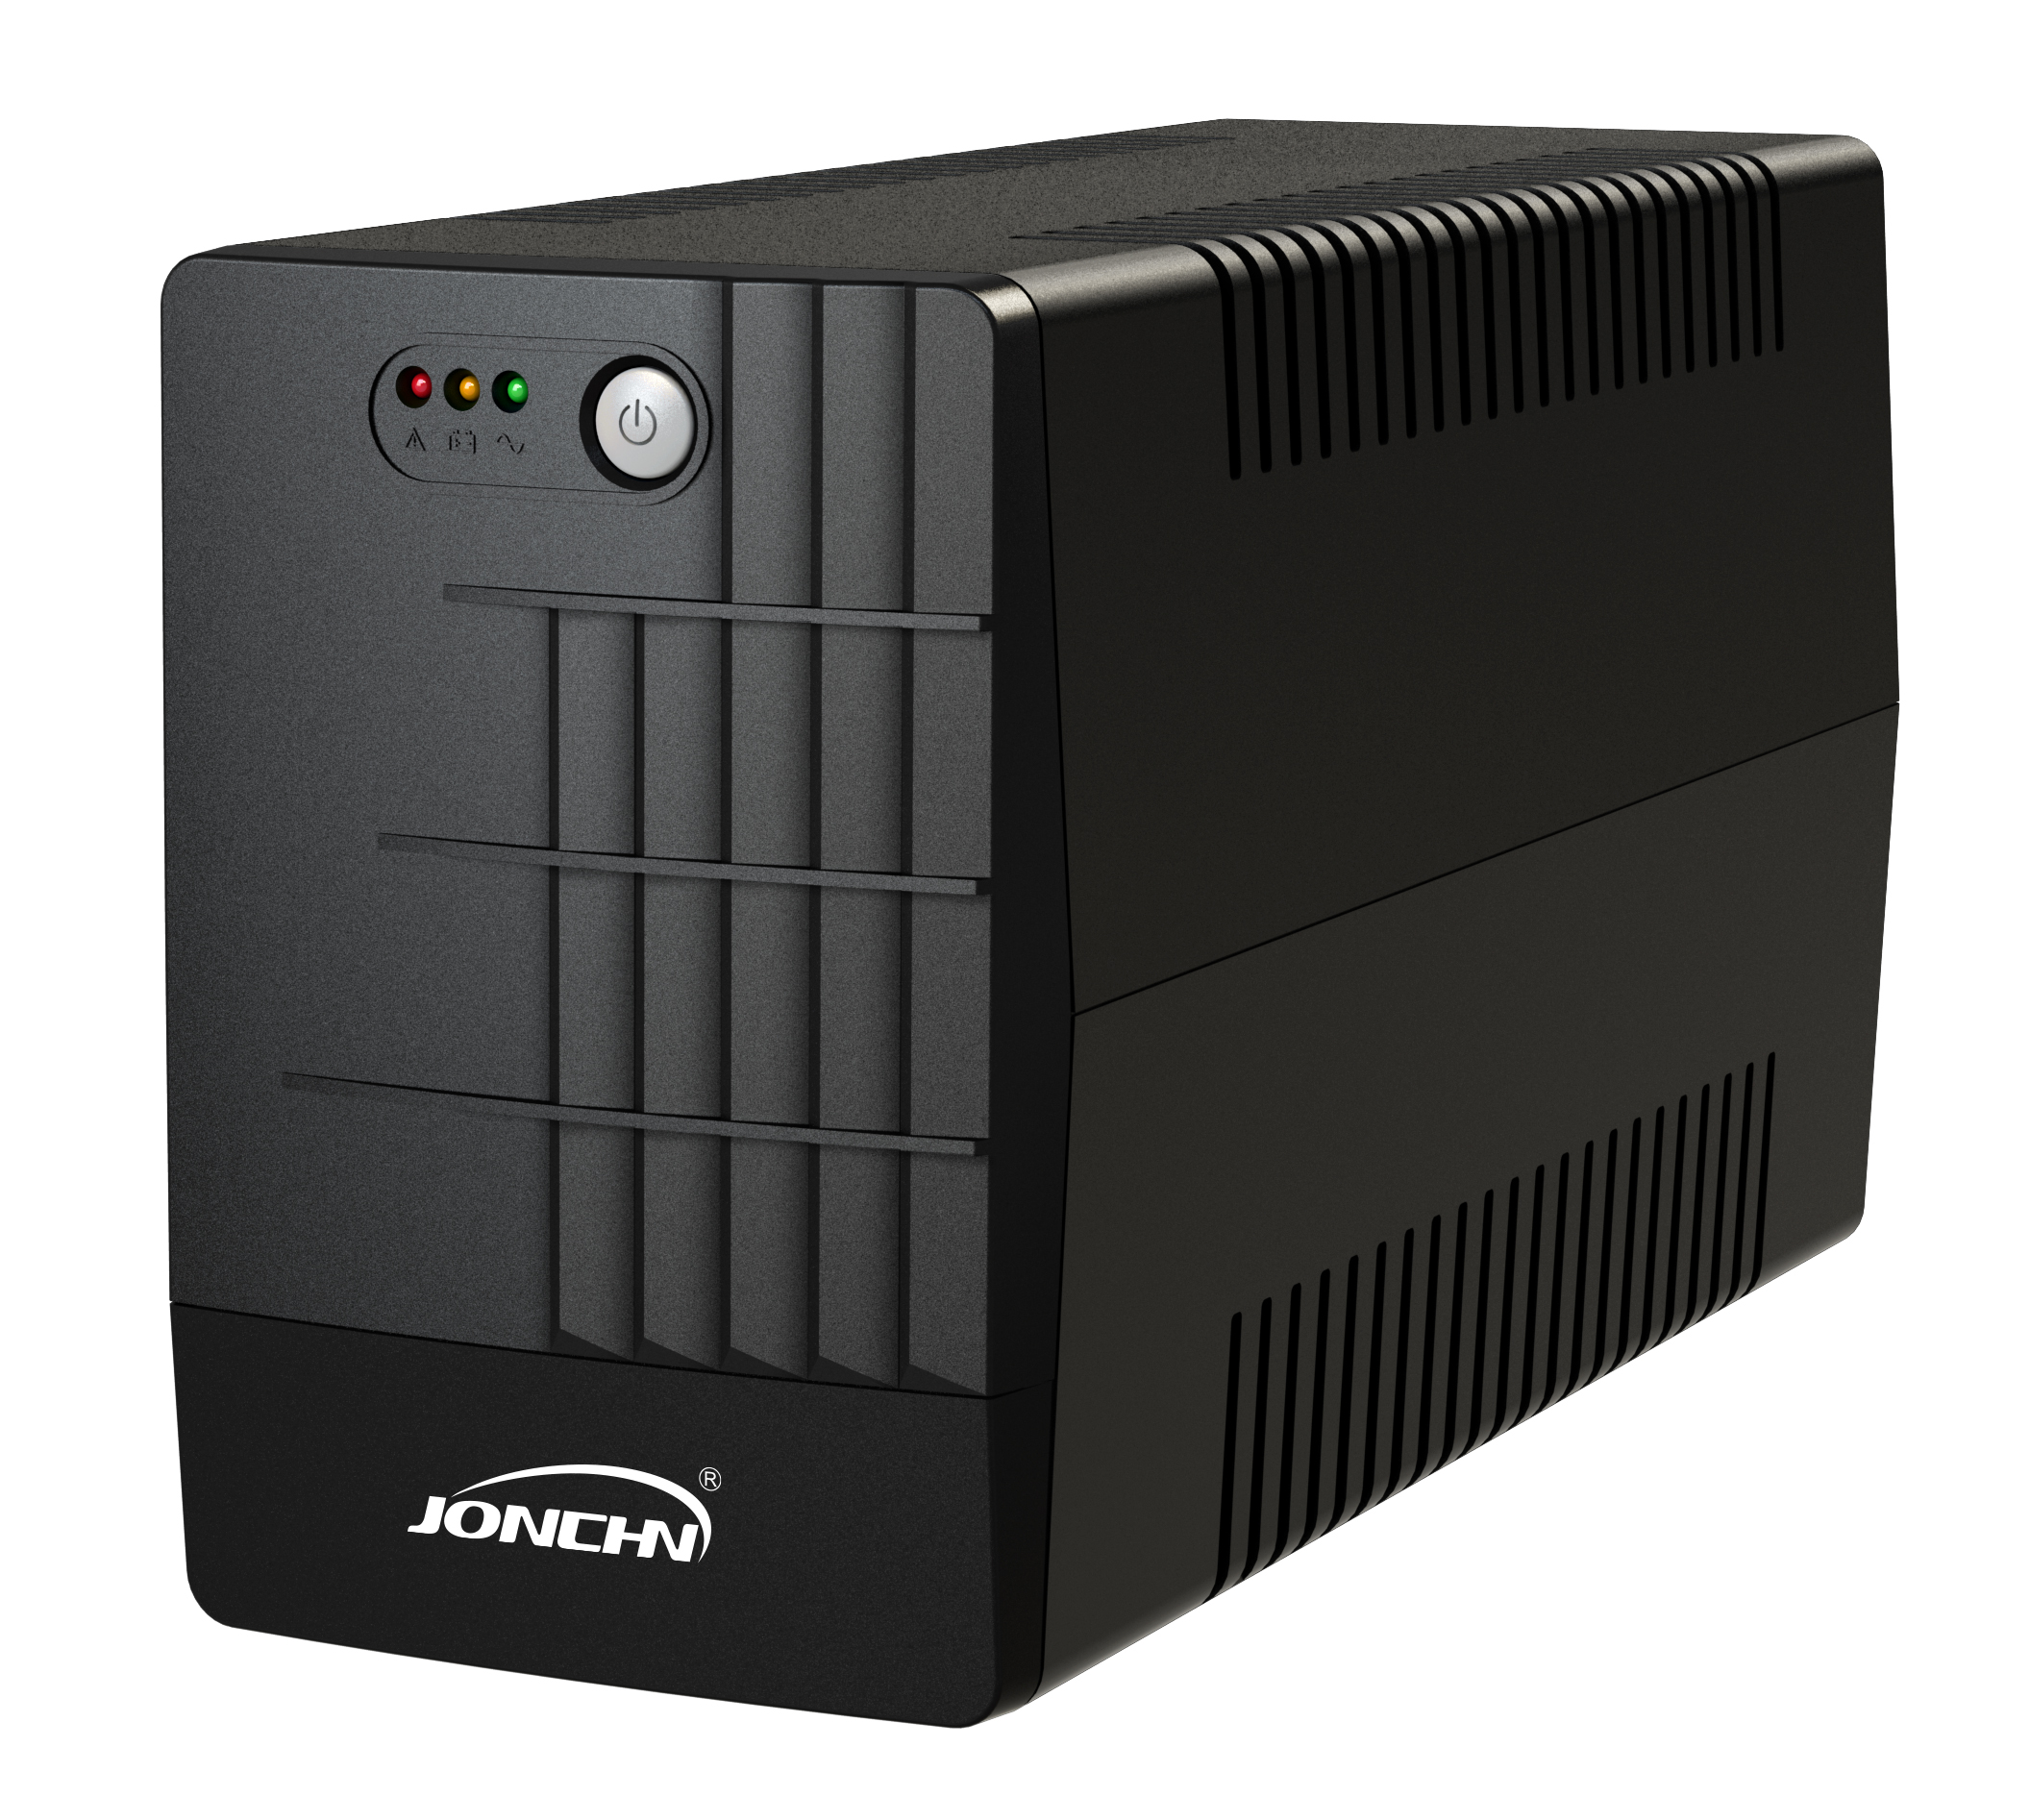 UPS Power supply | Give you uninterruptible power solution